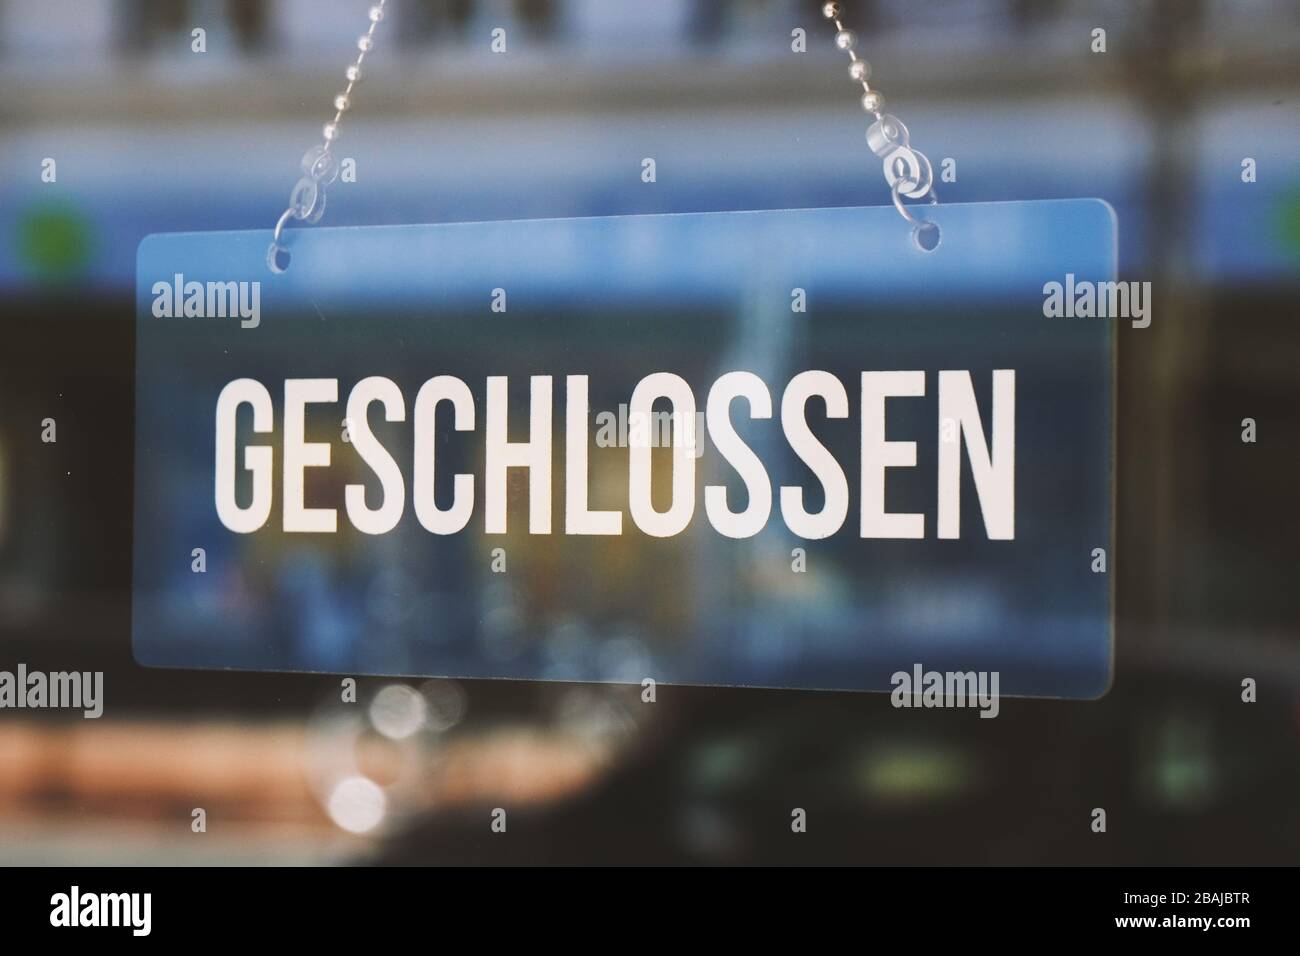 sign geschlossen - closed in german - economy crisis or business closure concept Stock Photo